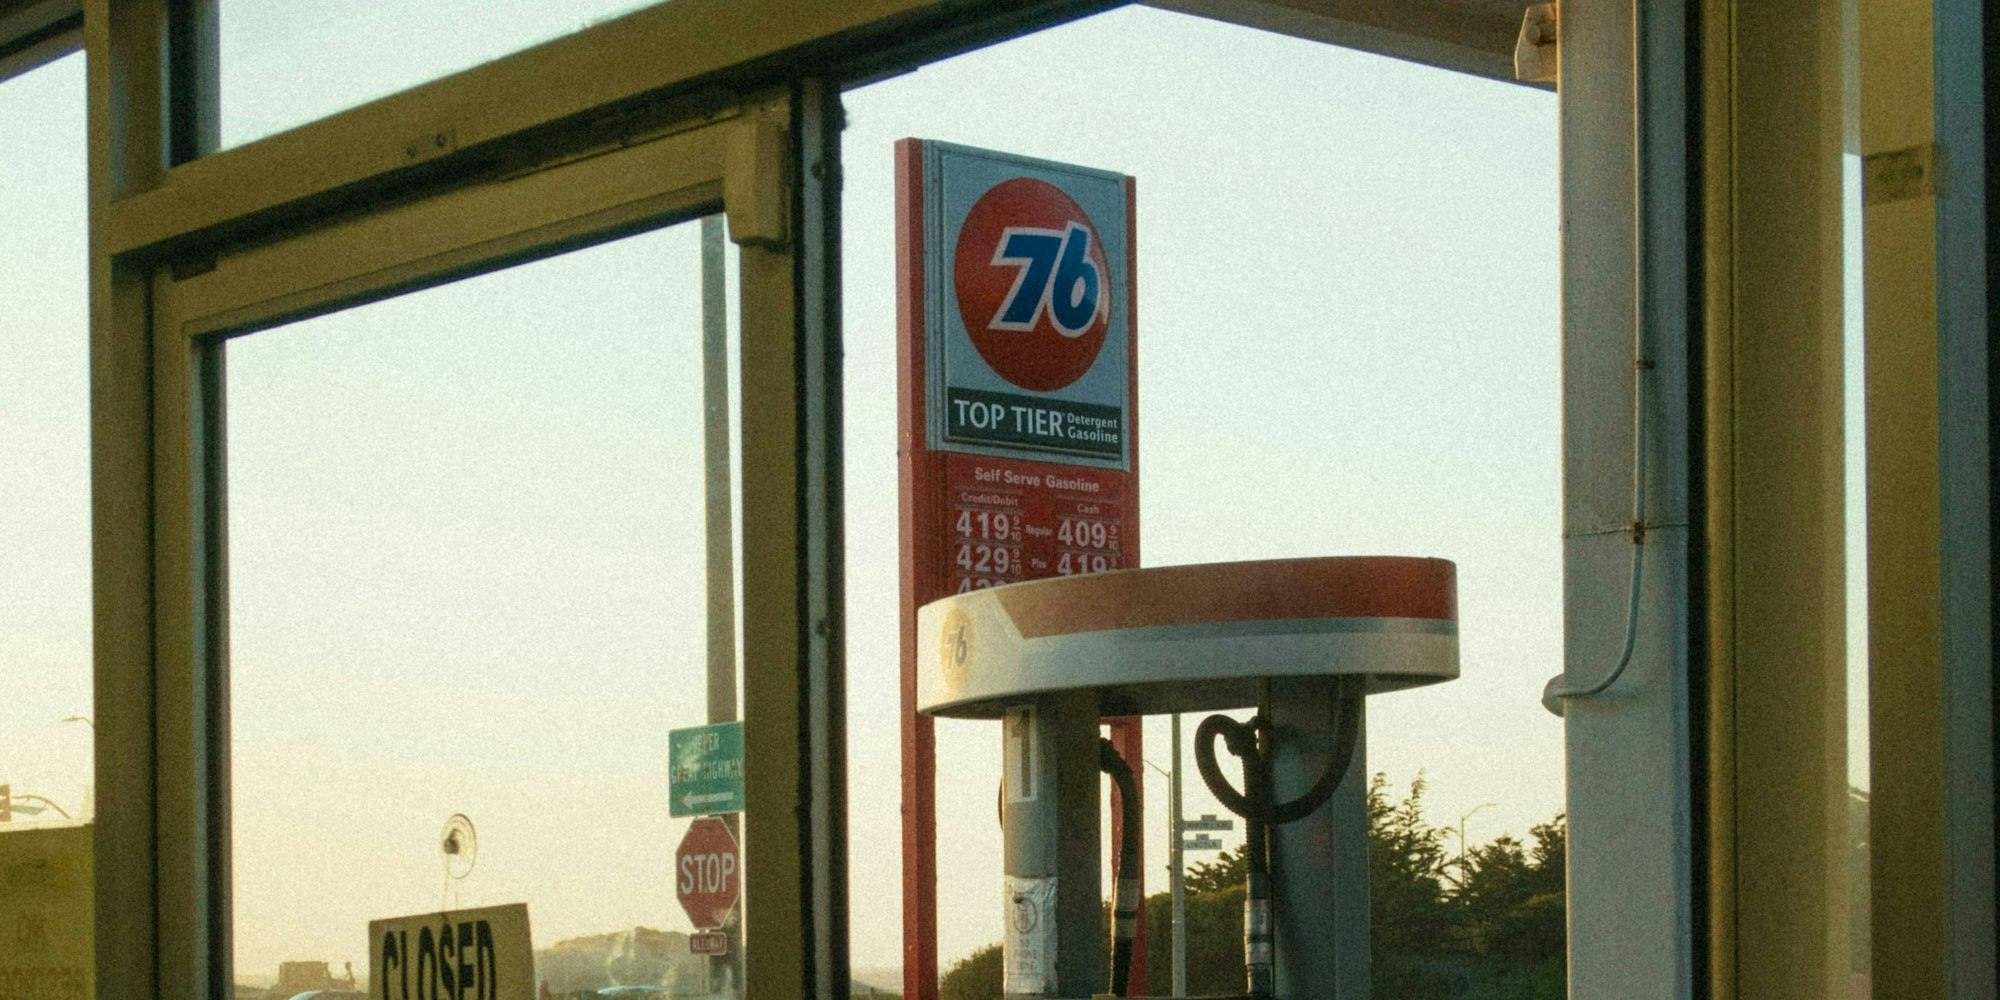 Recently Funded Acquisition Loan of a Fremont California 76 Gas Station